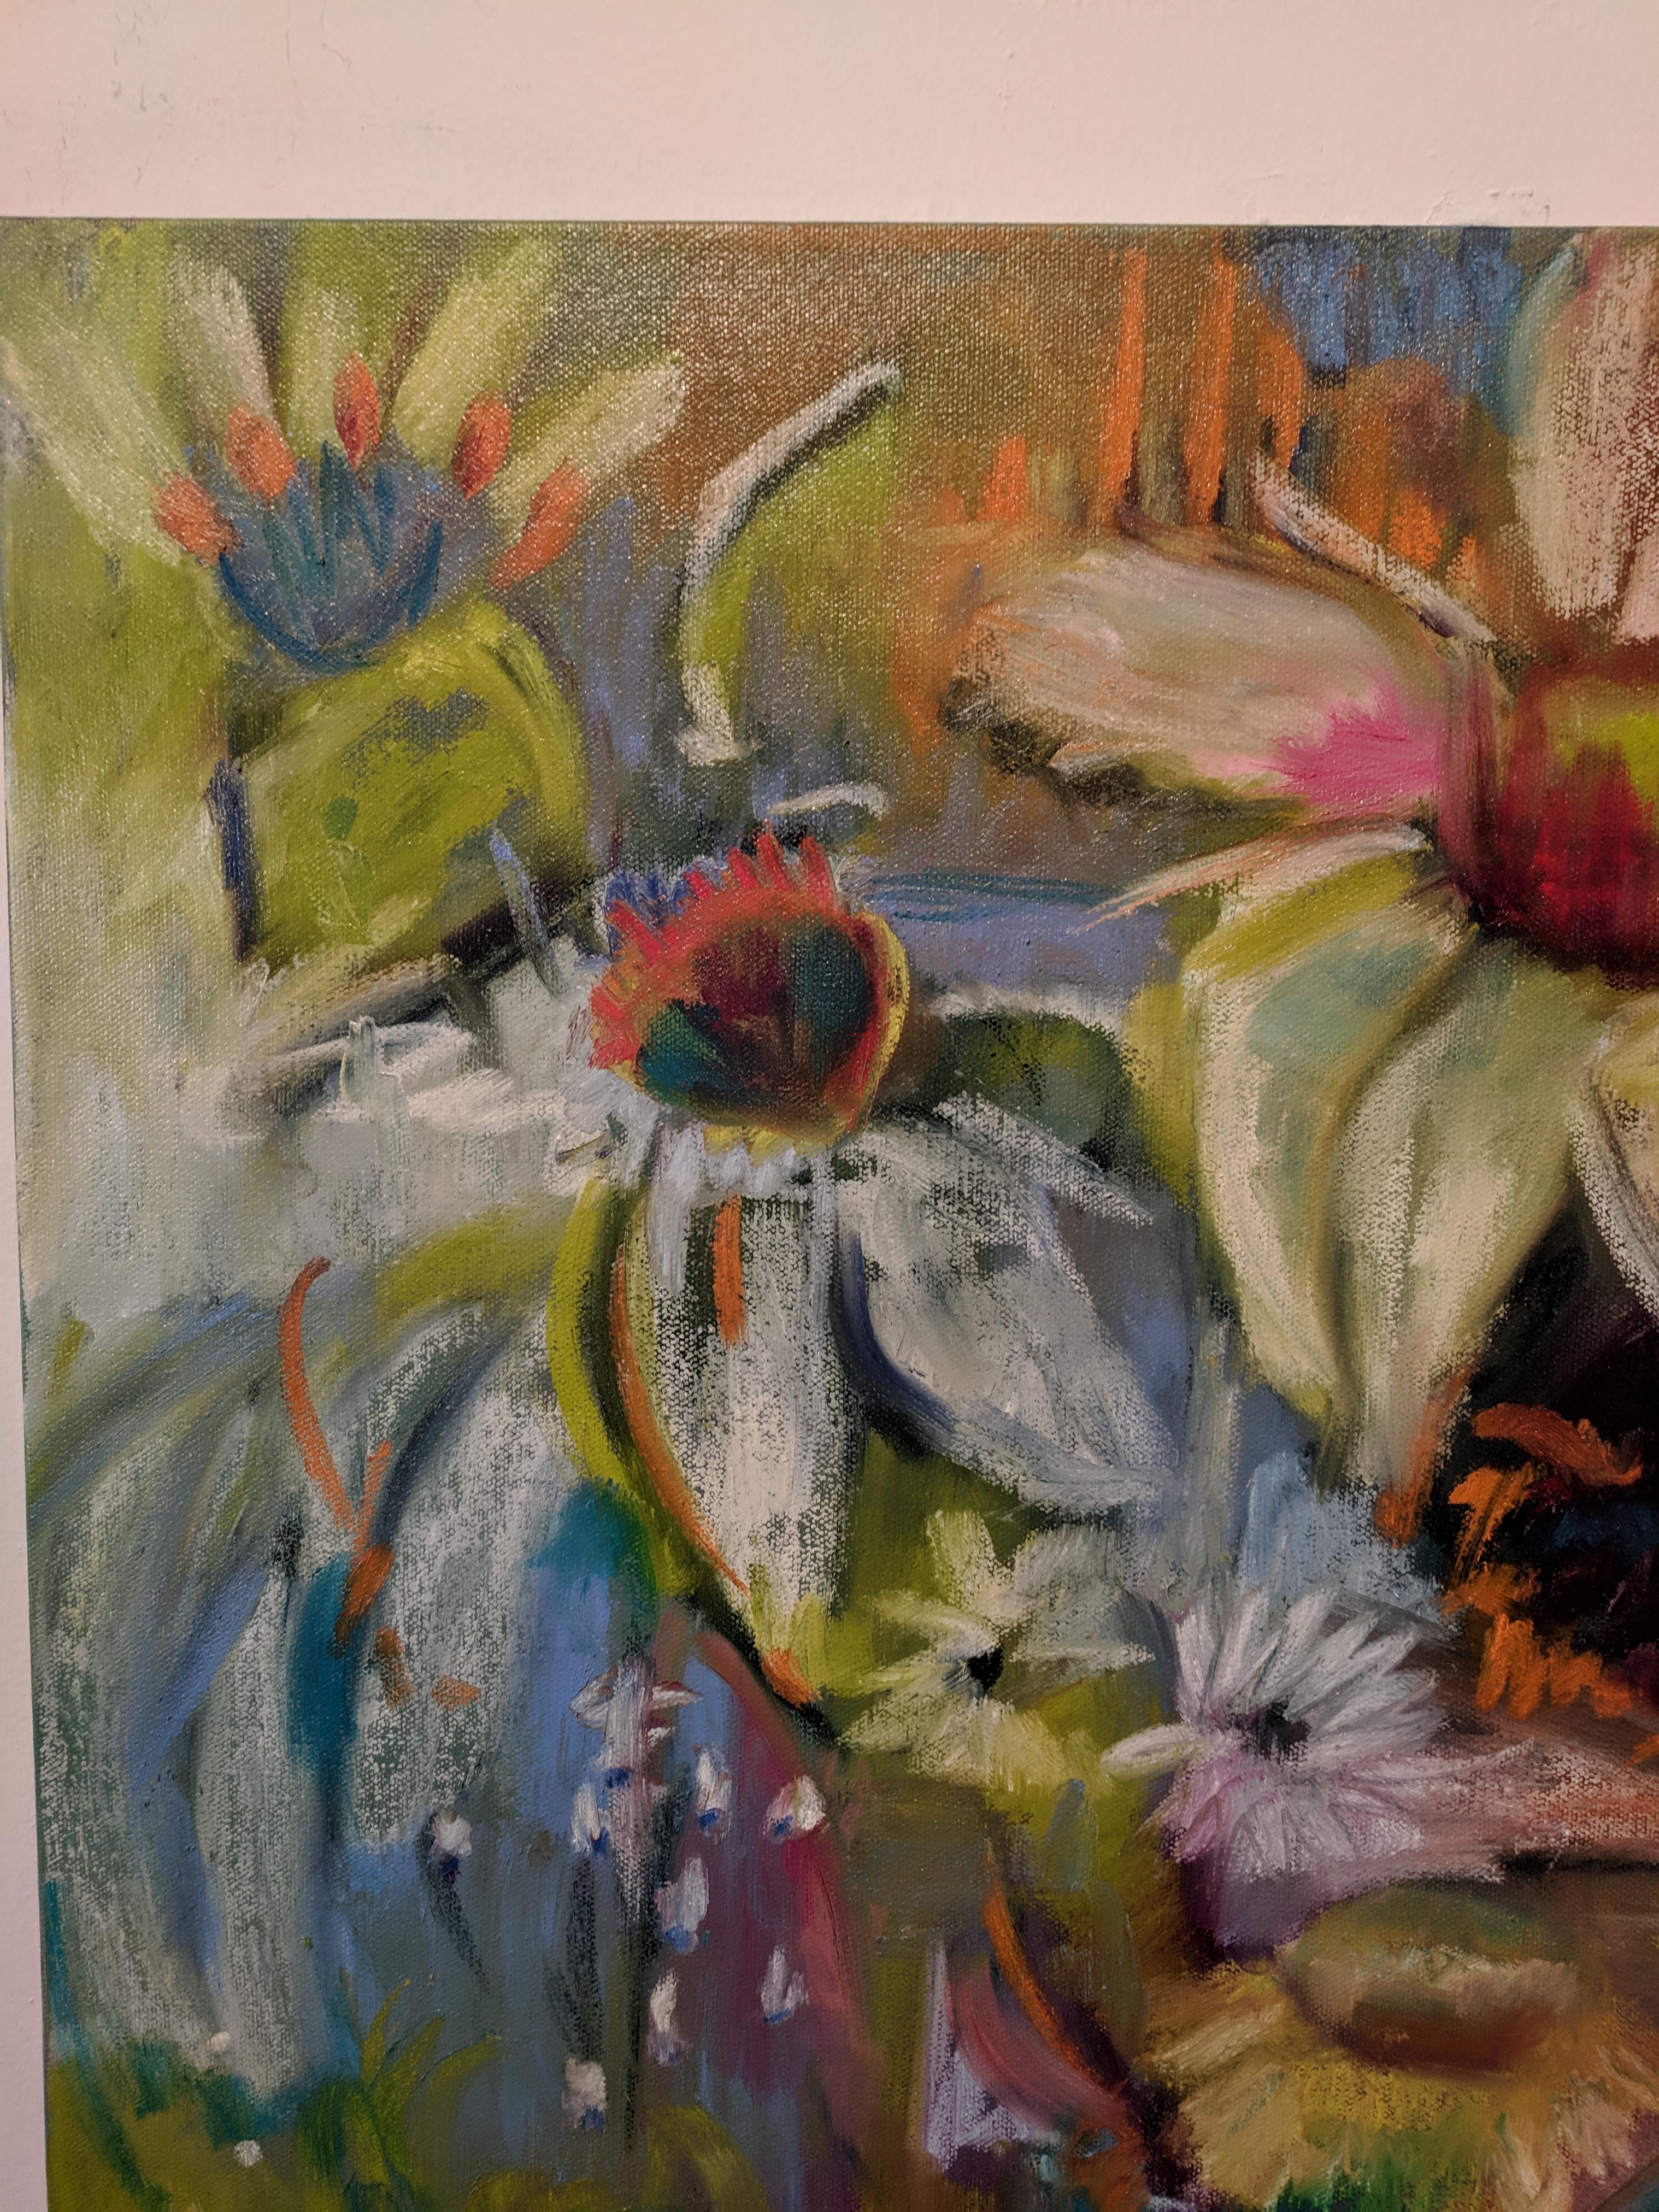 The artist emphasizes in this oil painting several mid-summer flowers in full bloom. The mostly white flowers are punctuated by stamens in shades of ochre. This is joyous piece signed by the artist in the front.

Alexandra Higgins is a landscape and